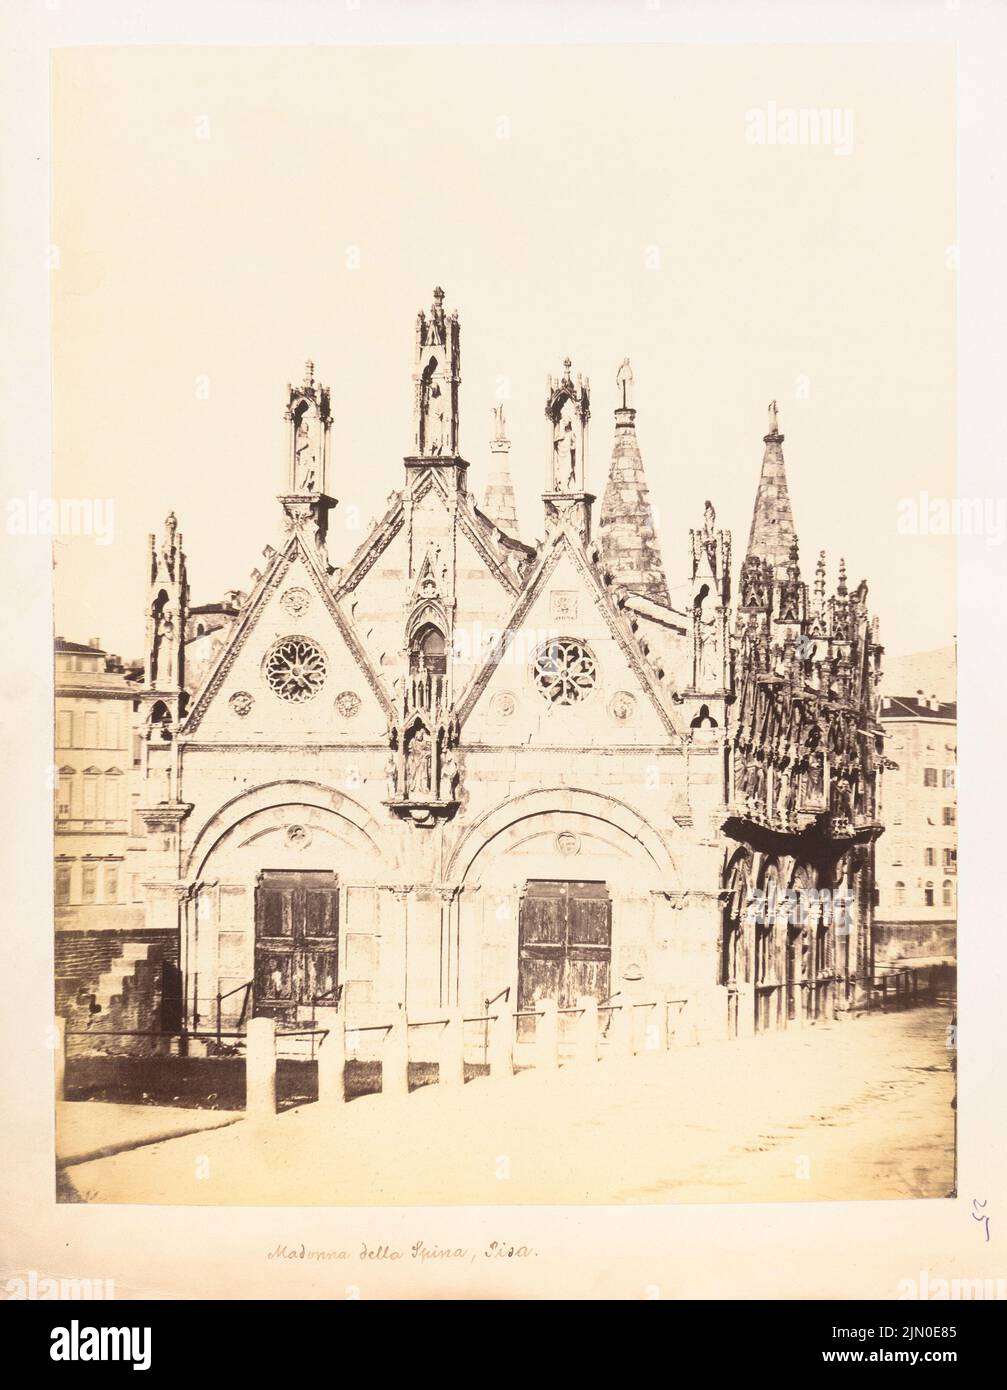 Unknown photographer, baptistery in Florence (without dat.): View. Photo on cardboard, 28 x 21.7 cm (including scan edges) N.N. : Baptisterium, Florenz Stock Photo